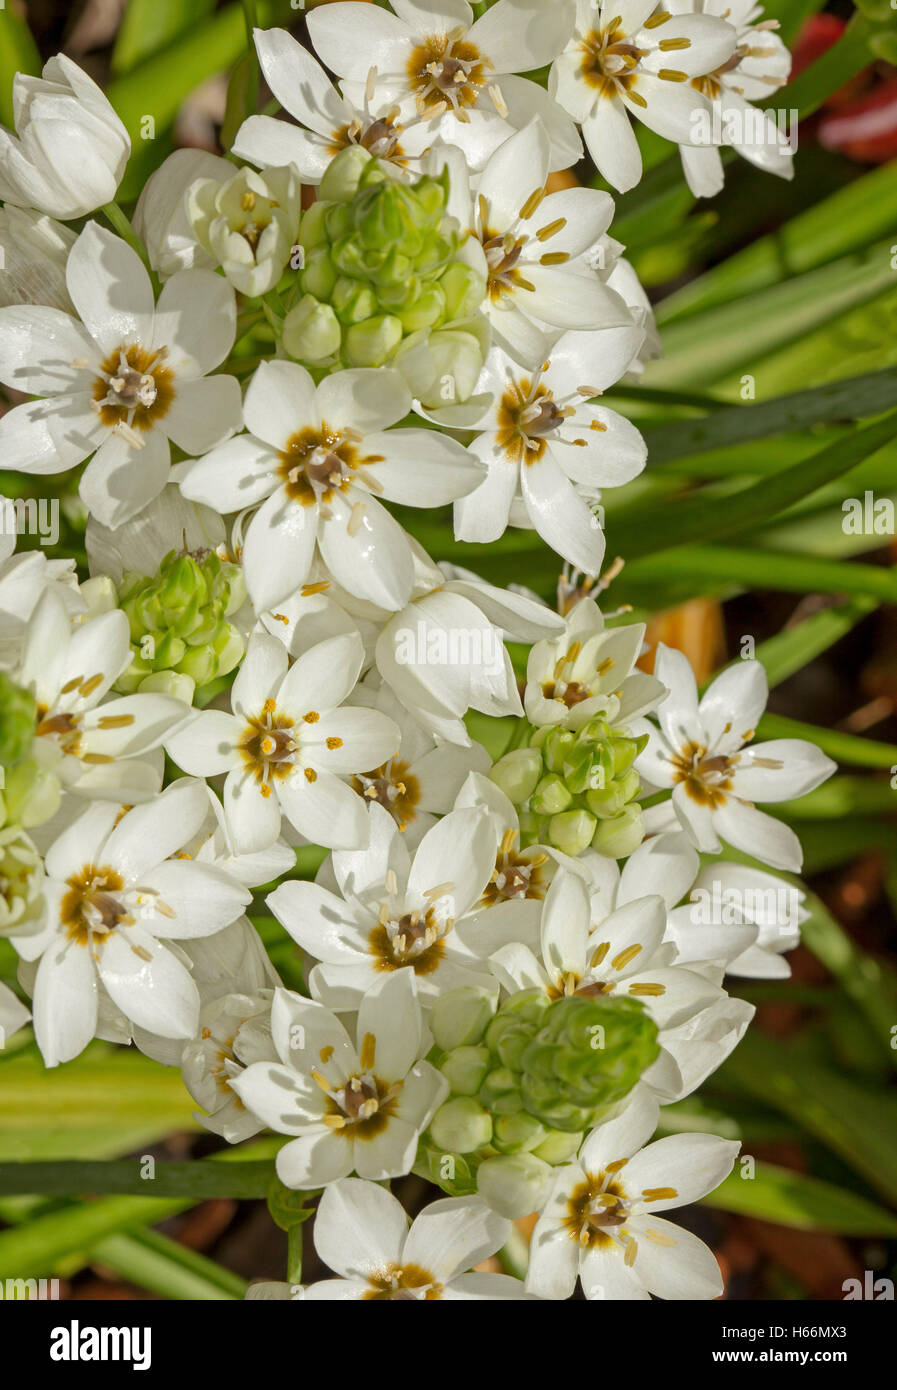 Cluster of stunning white flowers and green buds of Ornithogalum 'Chesapeake Snowflake' on background of green foliage Stock Photo